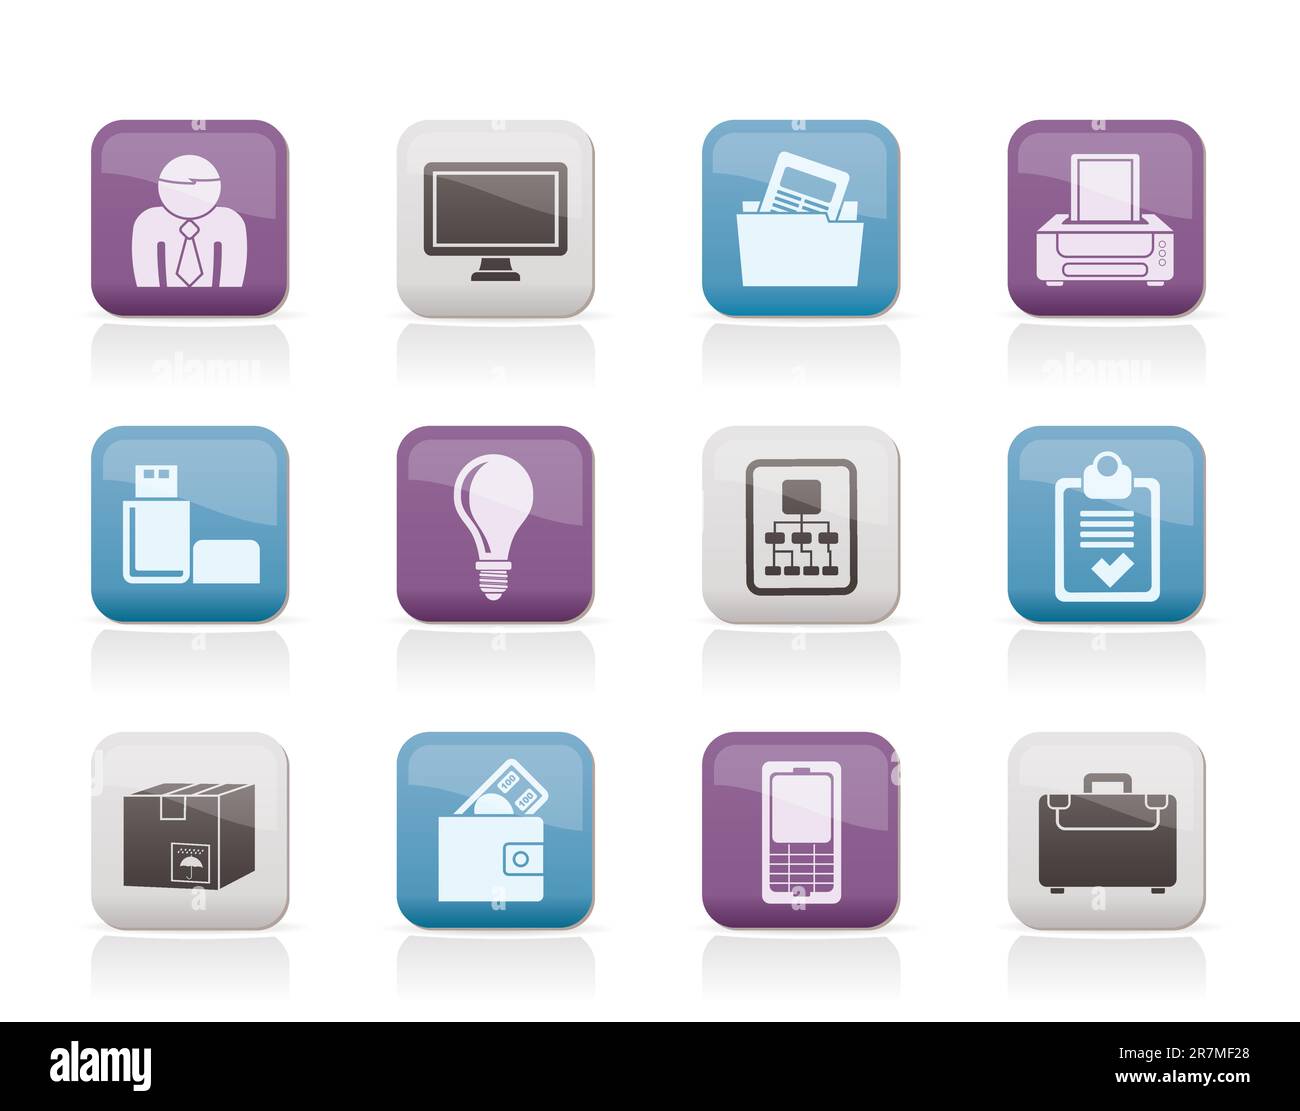 Business and office equipment icons - vector icon set Stock Vector